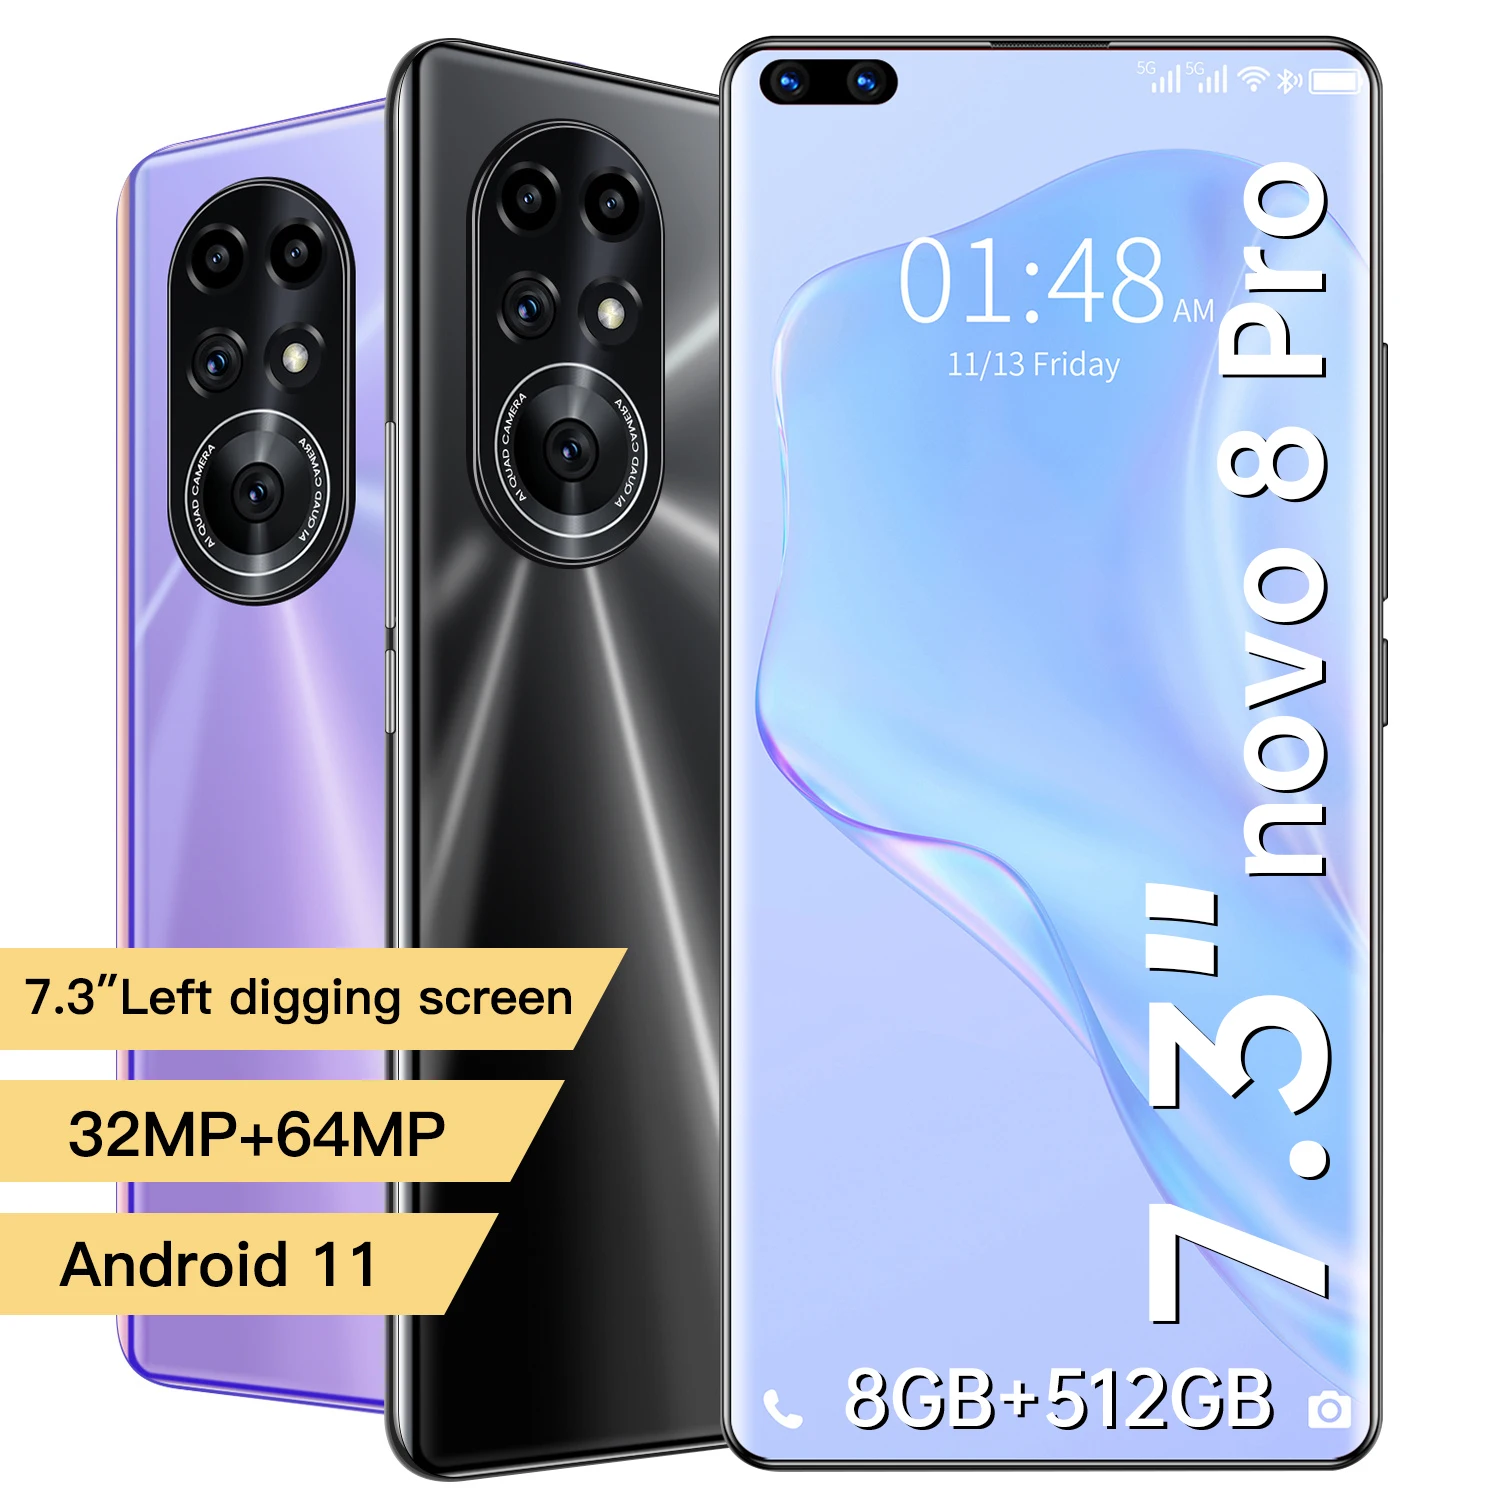 

Global Version 2021 NOVO8 Pro 7.3 Inch Left Digging Screen 8GB+512GB Andriod 11 Smartphones 32+64MP MT6889+ 5G Face ID Cellphone